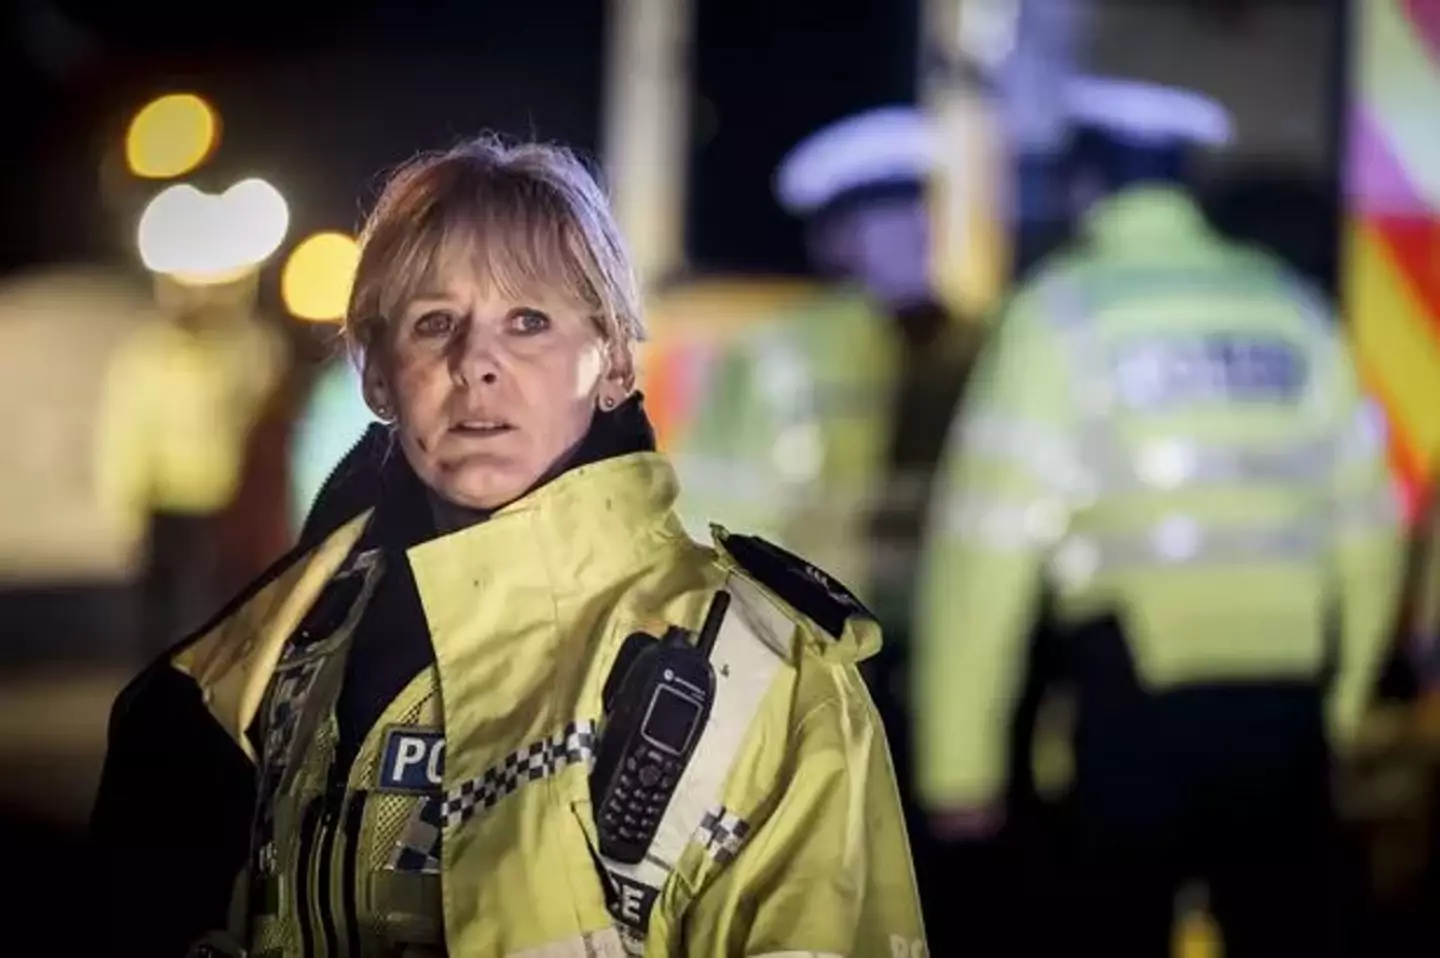 Fans were shocked to hear Sarah Lancashire didn’t sound like her Happy Valley character.